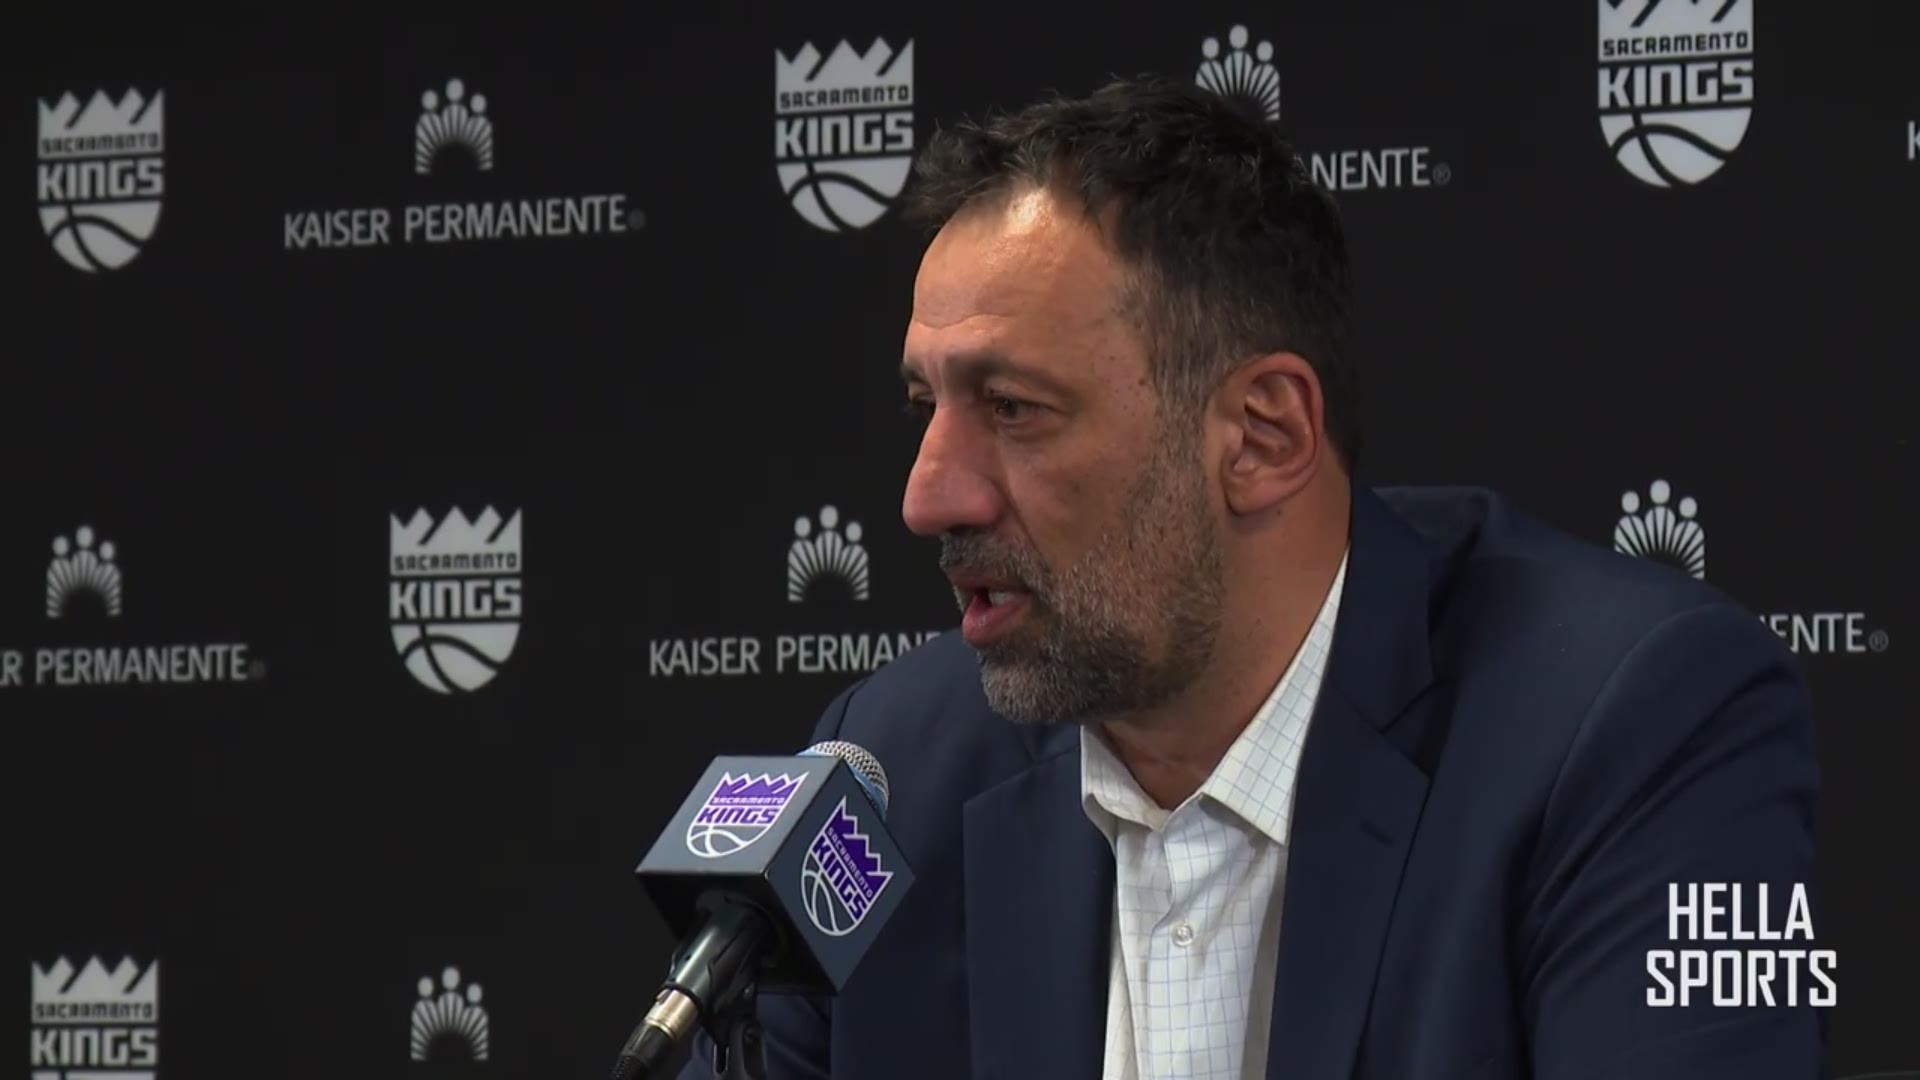 Sacramento Kings GM Vlade Divac discusses the recent trade made with the Atlanta Hawks to acquire Jabari Parker and Alex Len, why Dewayne Dedmon didn't work.